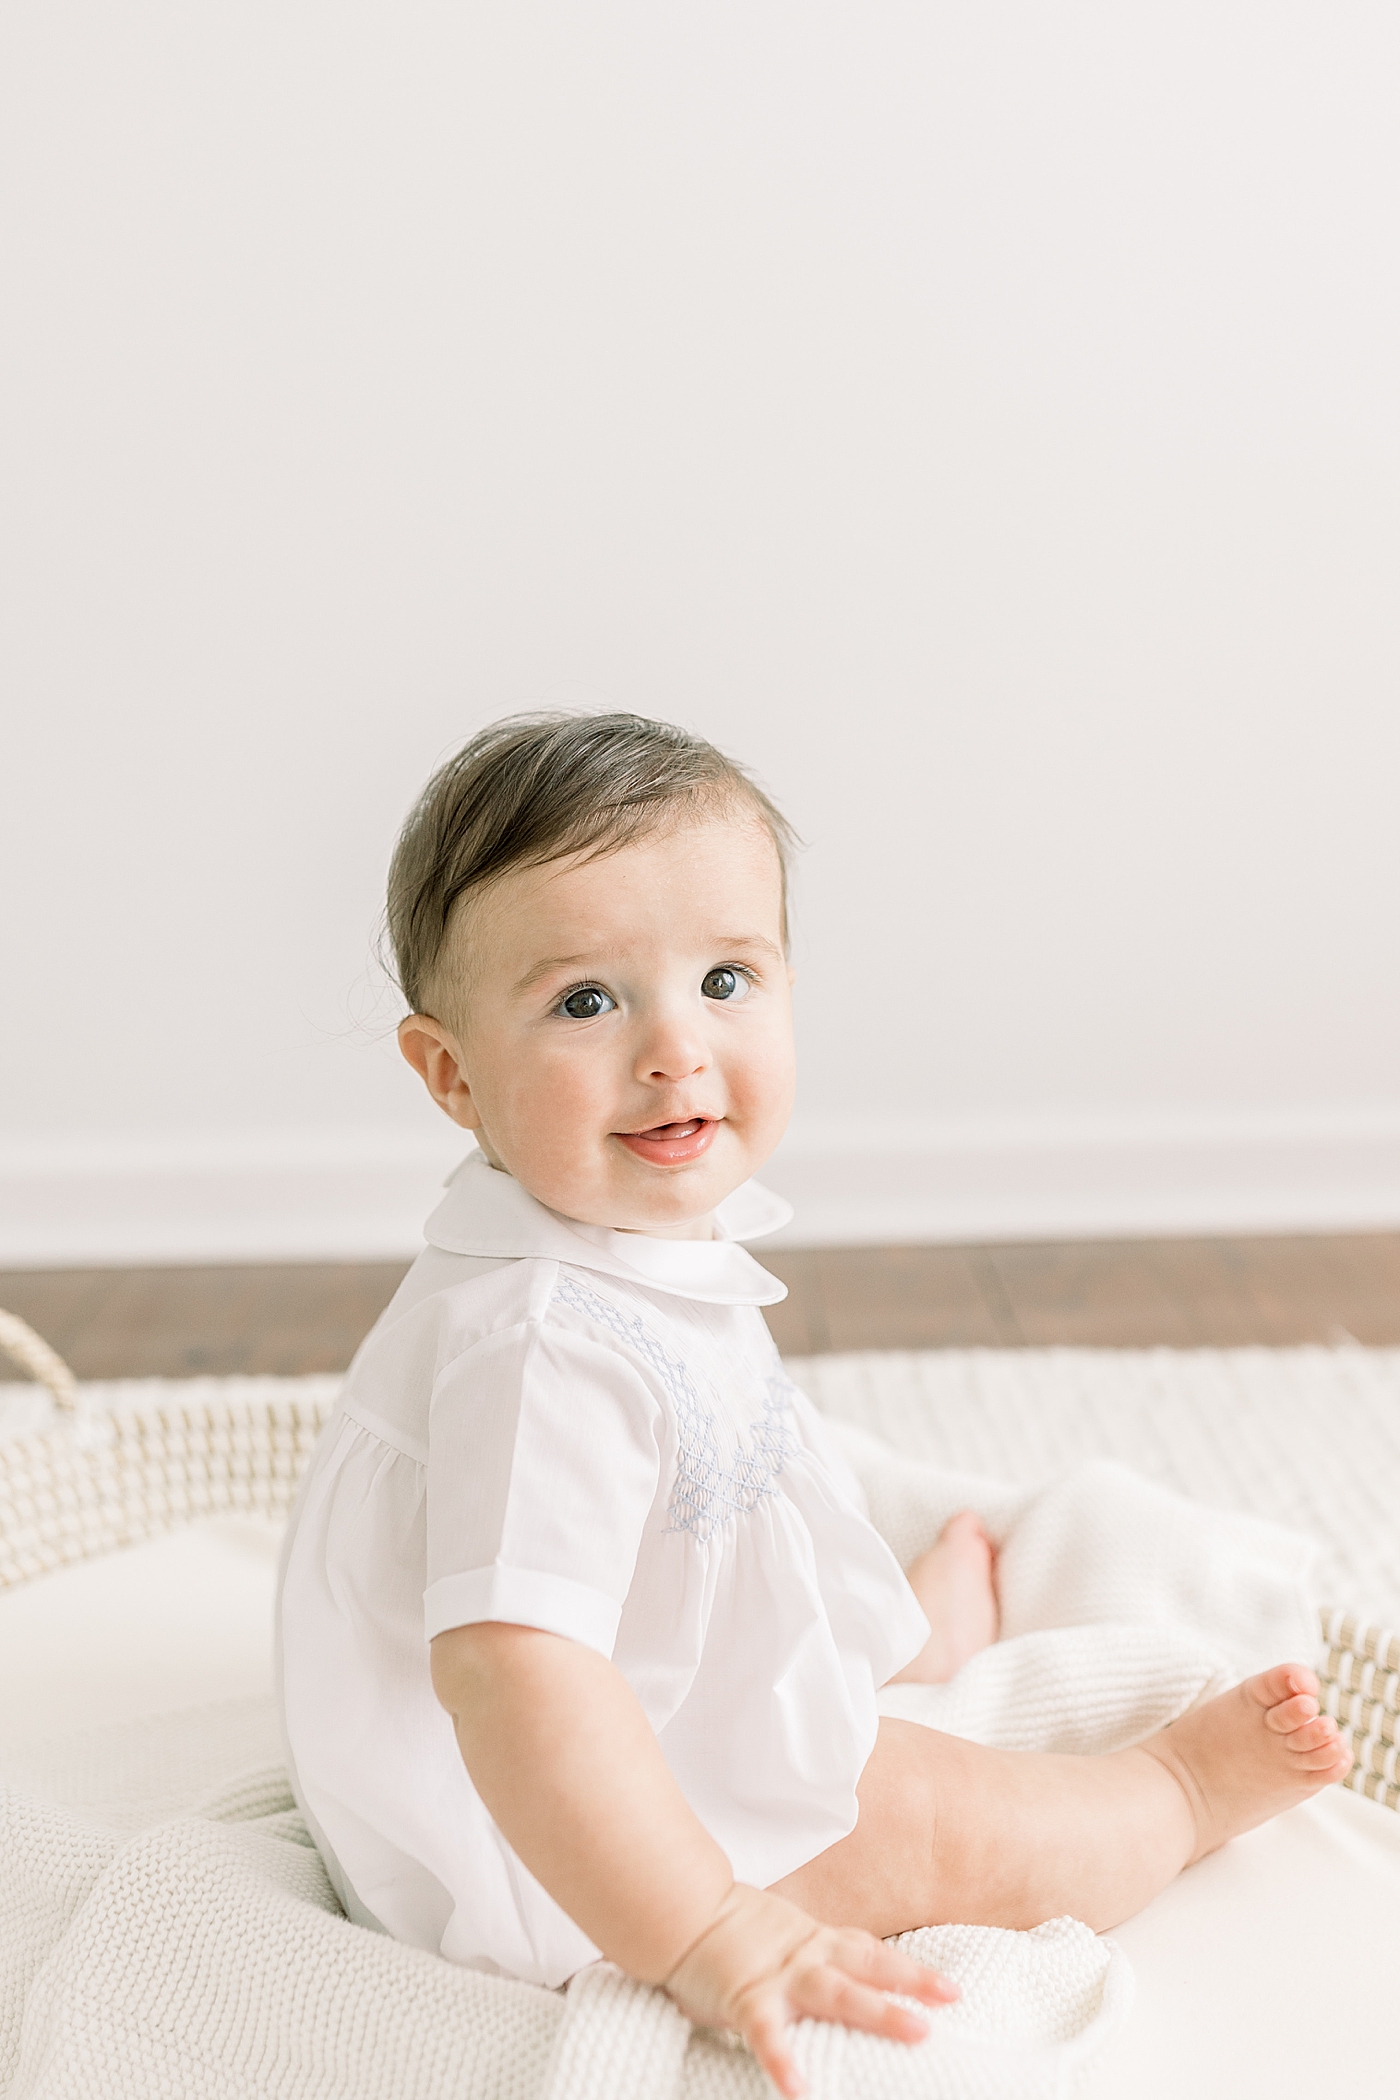 Baby sitting up in a shallow basket on a white rug in a white room | Images by Caitlyn Motycka